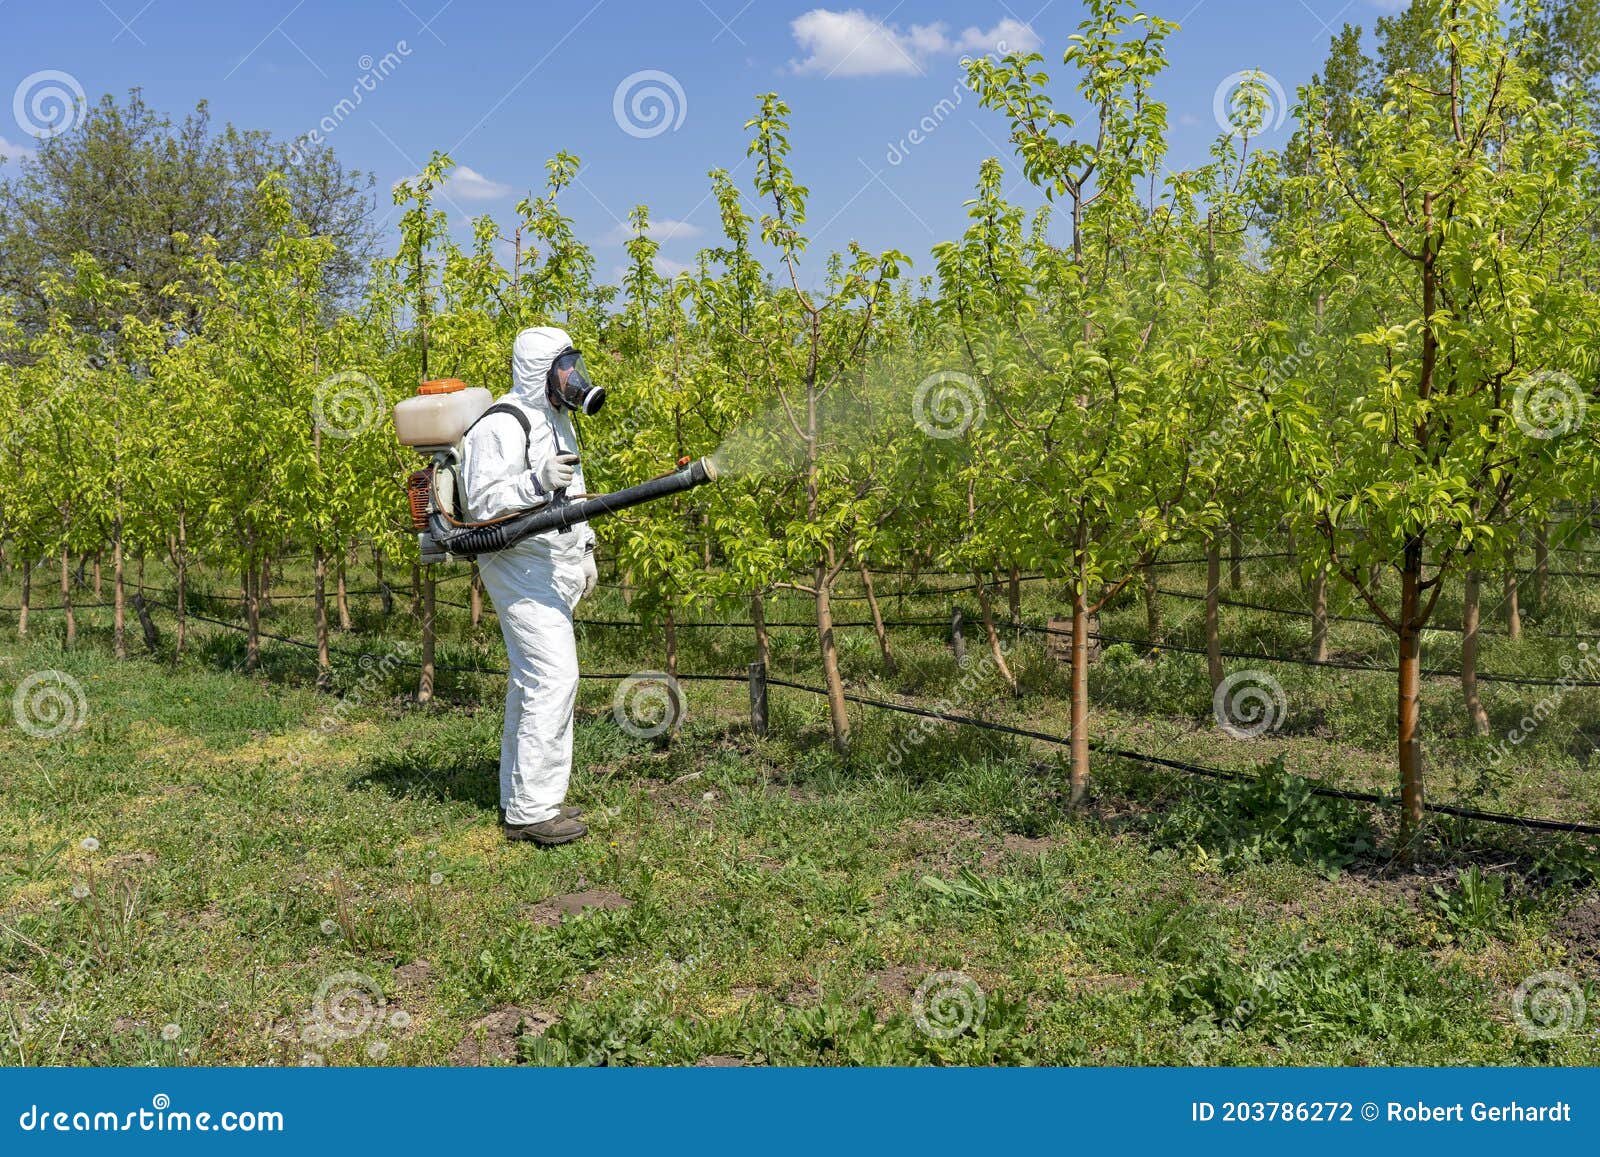 man in coveralls with gas mask spraying orchard in springtime. farmer in personal protective equipment spraying orchard.